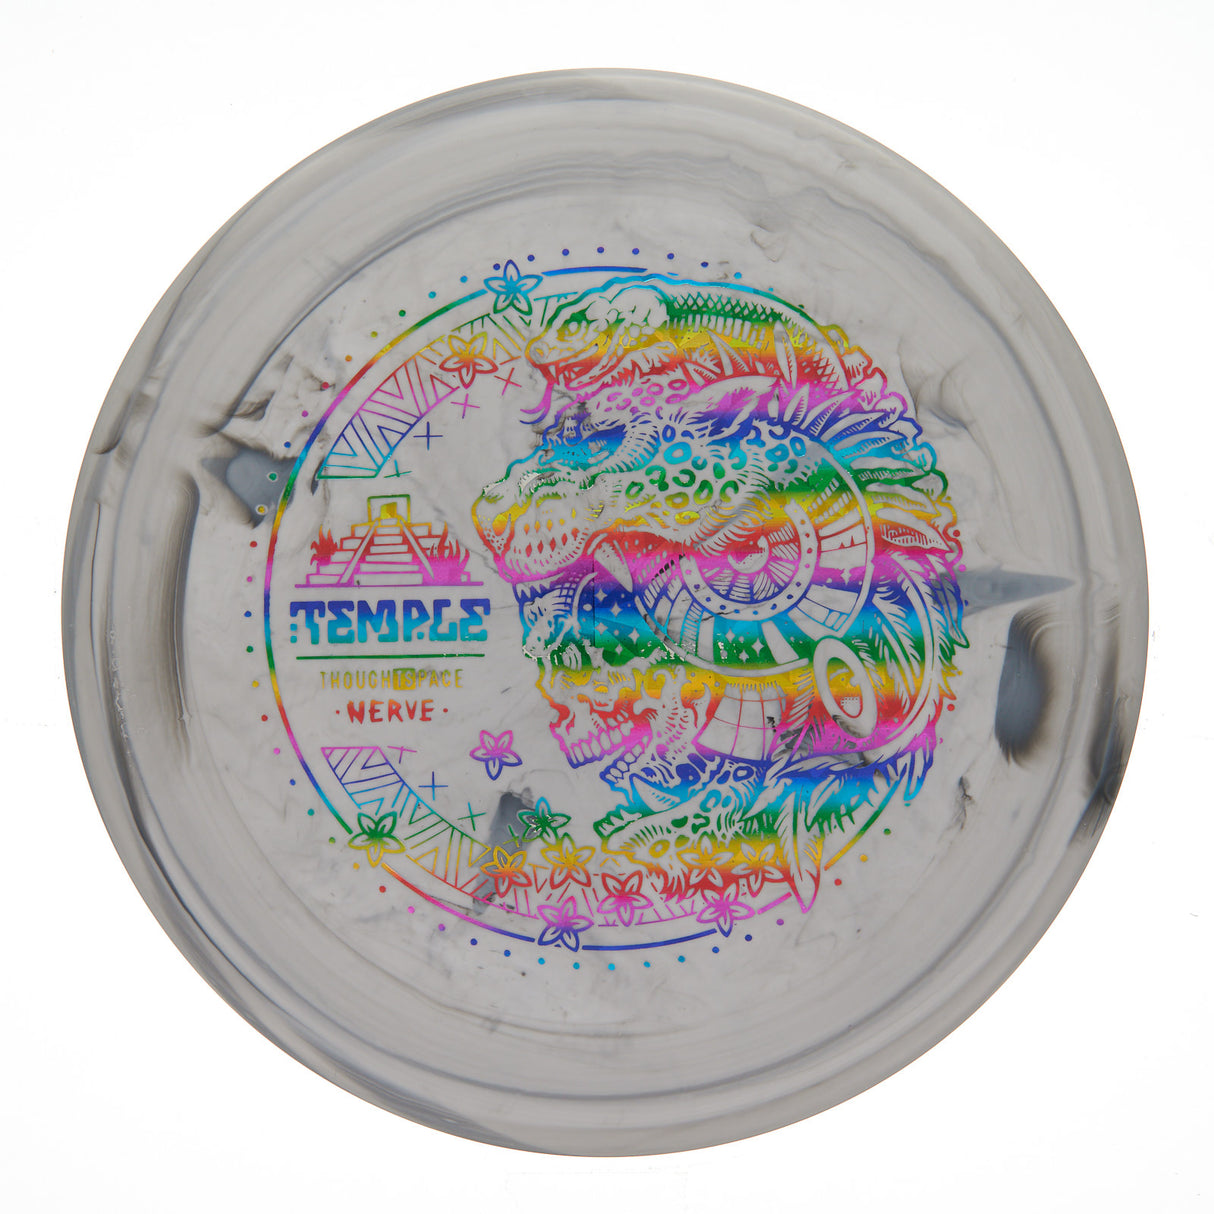 Thought Space Athletics Temple - Test Blend Nerve 174g | Style 0007